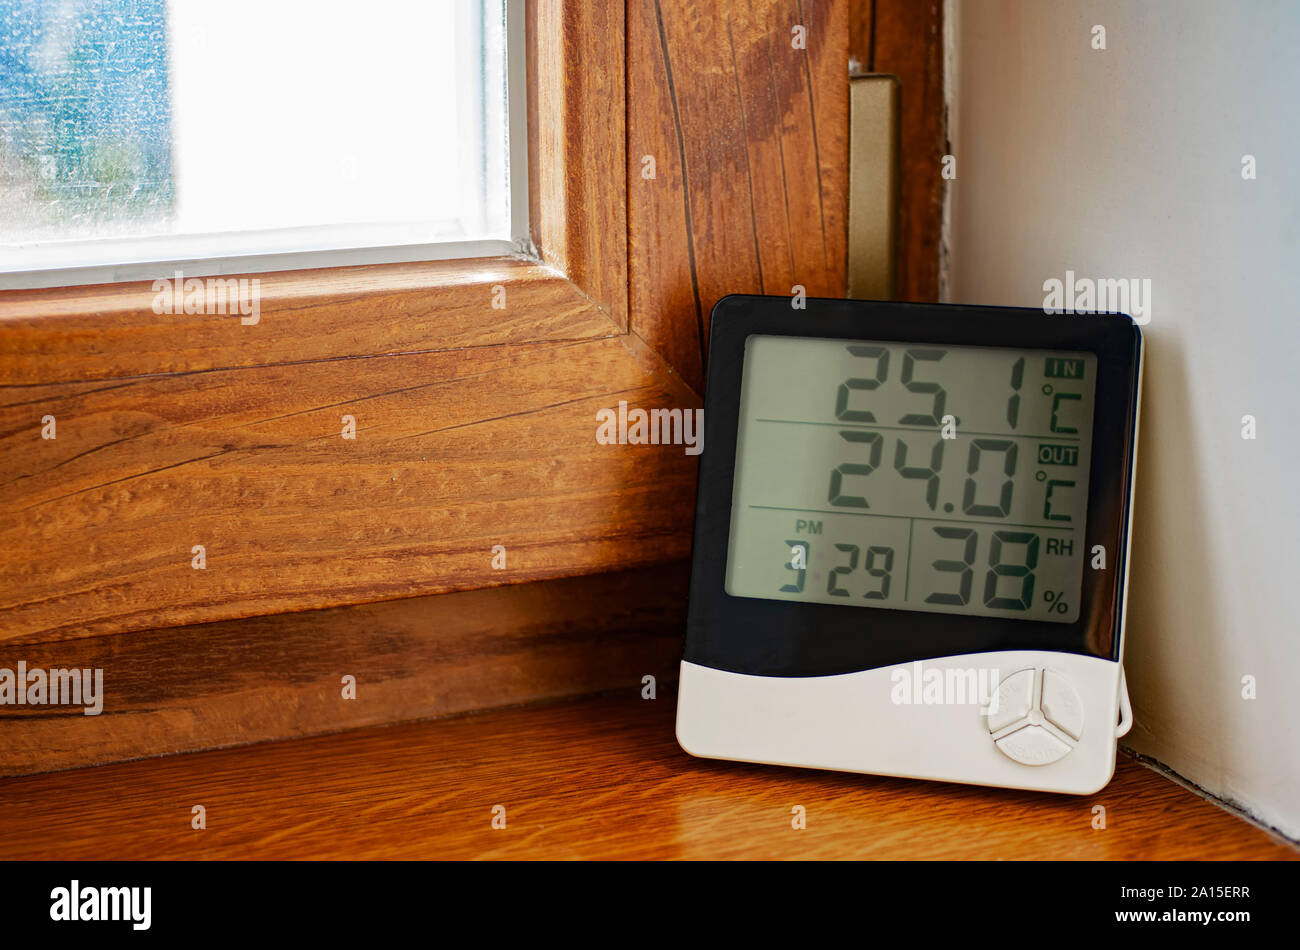 Home weather station. Digital indoor temperature and humidity sensor Stock  Photo - Alamy